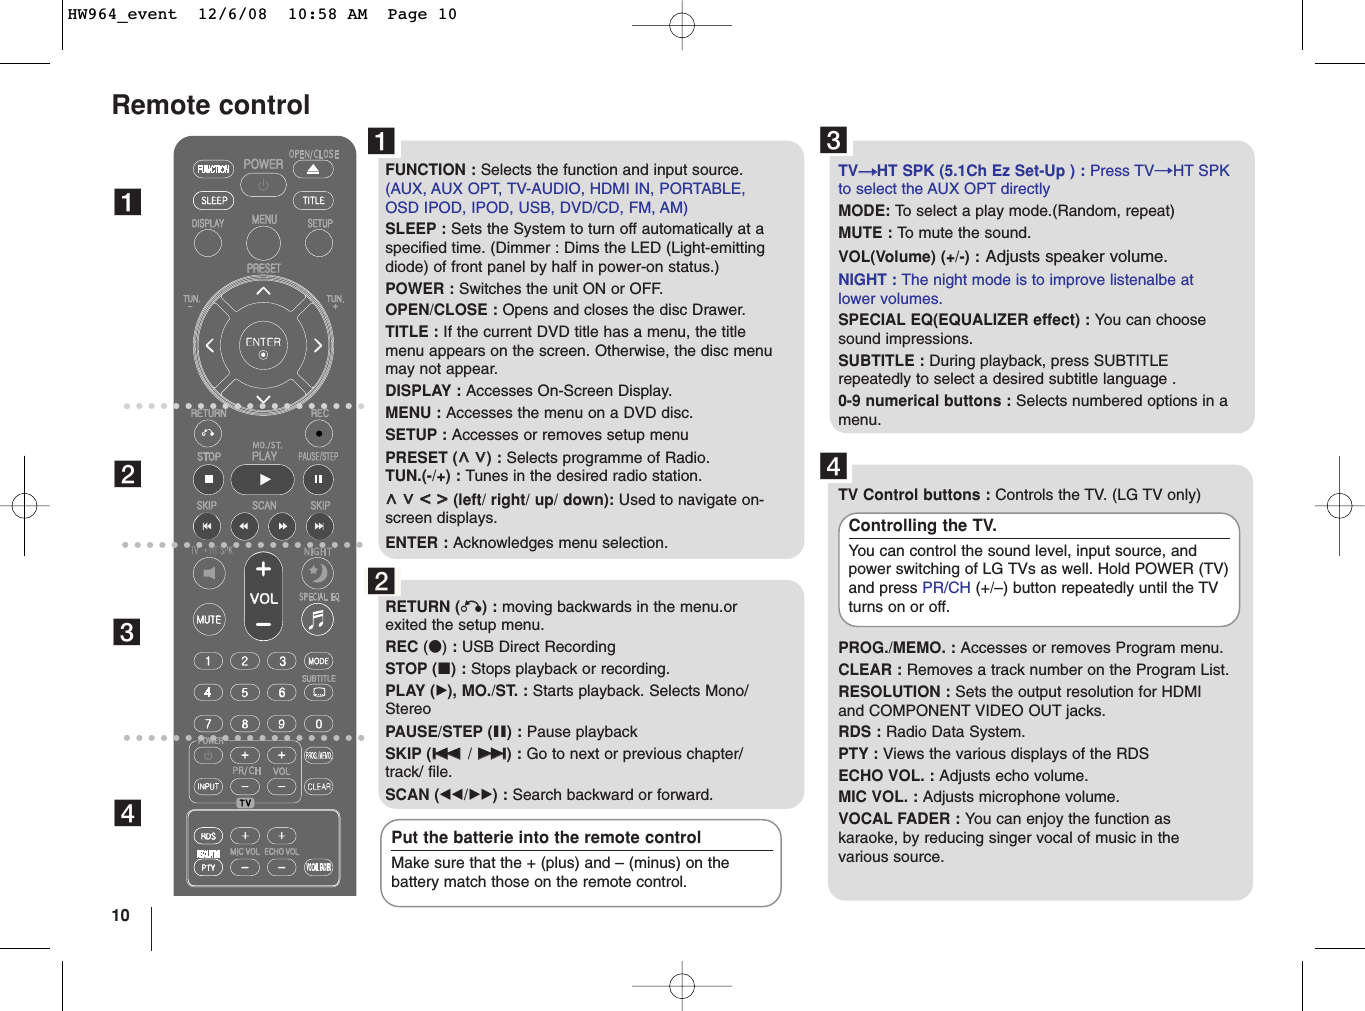 10Remote controlabcdFUNCTION : Selects the function and input source.(AUX, AUX OPT, TV-AUDIO, HDMI IN, PORTABLE,OSD IPOD, IPOD, USB, DVD/CD, FM, AM)SLEEP : Sets the System to turn off automatically at aspecified time. (Dimmer : Dims the LED (Light-emittingdiode) of front panel by half in power-on status.)POWER : Switches the unit ON or OFF.OPEN/CLOSE : Opens and closes the disc Drawer.TITLE : If the current DVD title has a menu, the titlemenu appears on the screen. Otherwise, the disc menumay not appear.DISPLAY : Accesses On-Screen Display.MENU : Accesses the menu on a DVD disc.SETUP : Accesses or removes setup menu PRESET (UU  uu) : Selects programme of Radio.TUN.(-/+) : Tunes in the desired radio station.UU  uu  II  ii(left/ right/ up/ down): Used to navigate on-screen displays.ENTER : Acknowledges menu selection.RETURN (O) : moving backwards in the menu.orexited the setup menu.REC (z): USB Direct RecordingSTOP (x) : Stops playback or recording.PLAY (B), MO./ST. : Starts playback. Selects Mono/StereoPAUSE/STEP (X) : Pause playback SKIP (../ &gt;&gt;) : Go to next or previous chapter/track/ file. SCAN (bb/BB) : Search backward or forward.TVttHT SPK (5.1Ch Ez Set-Up ) : Press TVtHT SPKto select the AUX OPT directly MODE: To  select a play mode.(Random, repeat)MUTE : To  mute the sound.VOL(Volume) (+/-) : Adjusts speaker volume.NIGHT : The night mode is to improve listenalbe atlower volumes.SPECIAL EQ(EQUALIZER effect) : You can choosesound impressions.SUBTITLE : During playback, press SUBTITLErepeatedly to select a desired subtitle language .0-9 numerical buttons : Selects numbered options in amenu.TV Control buttons : Controls the TV. (LG TV only)PROG./MEMO. : Accesses or removes Program menu.CLEAR : Removes a track number on the Program List.RESOLUTION : Sets the output resolution for HDMIand COMPONENT VIDEO OUT jacks.RDS : Radio Data System.PTY : Views the various displays of the RDS ECHO VOL. : Adjusts echo volume.MIC VOL. : Adjusts microphone volume.VOCAL FADER : You can enjoy the function askaraoke, by reducing singer vocal of music in thevarious source. Controlling the TV.You can control the sound level, input source, andpower switching of LG TVs as well. Hold POWER (TV)and press PR/CH (+/–) button repeatedly until the TVturns on or off.Put the batterie into the remote controlMake sure that the + (plus) and – (minus) on thebattery match those on the remote control.abcdHW964_event  12/6/08  10:58 AM  Page 10